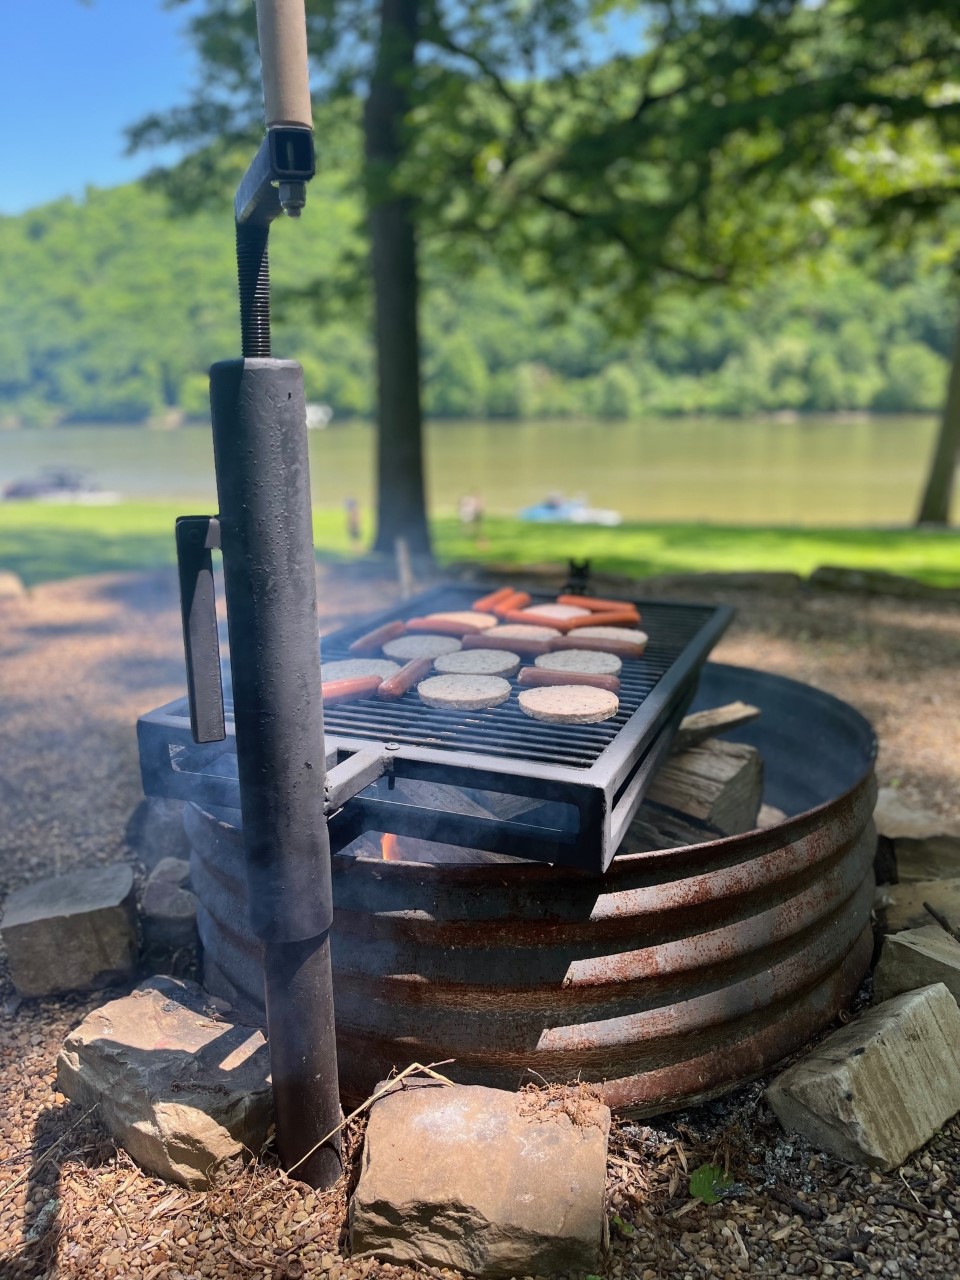 Grill hotdogs and hamburgers. River view.